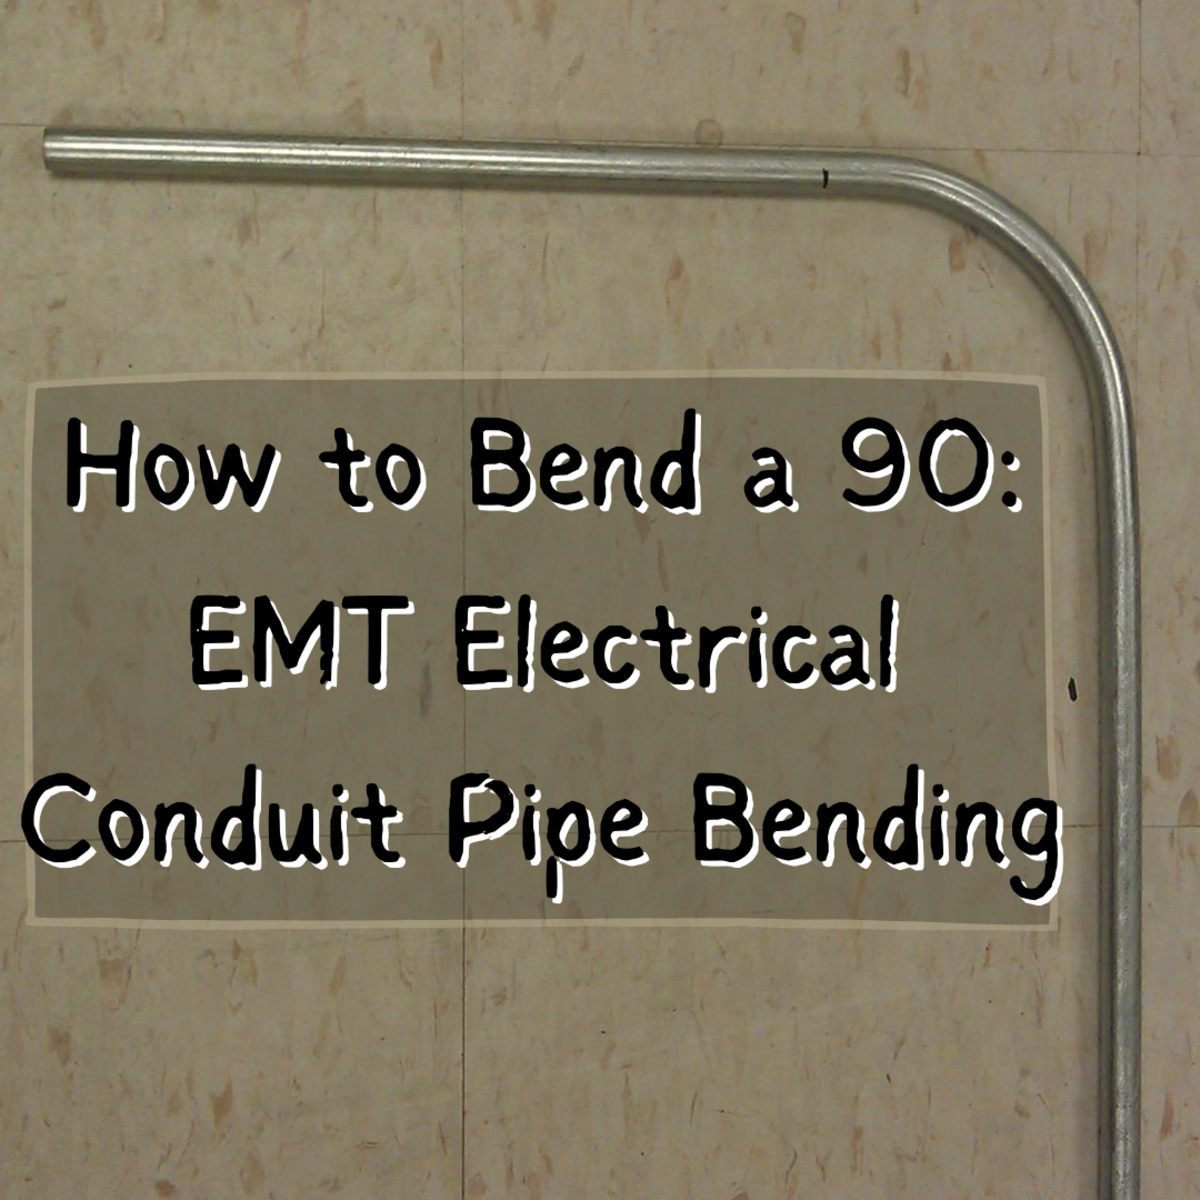 EMT Electrical Conduit Pipe Bending: How to Bend a 90